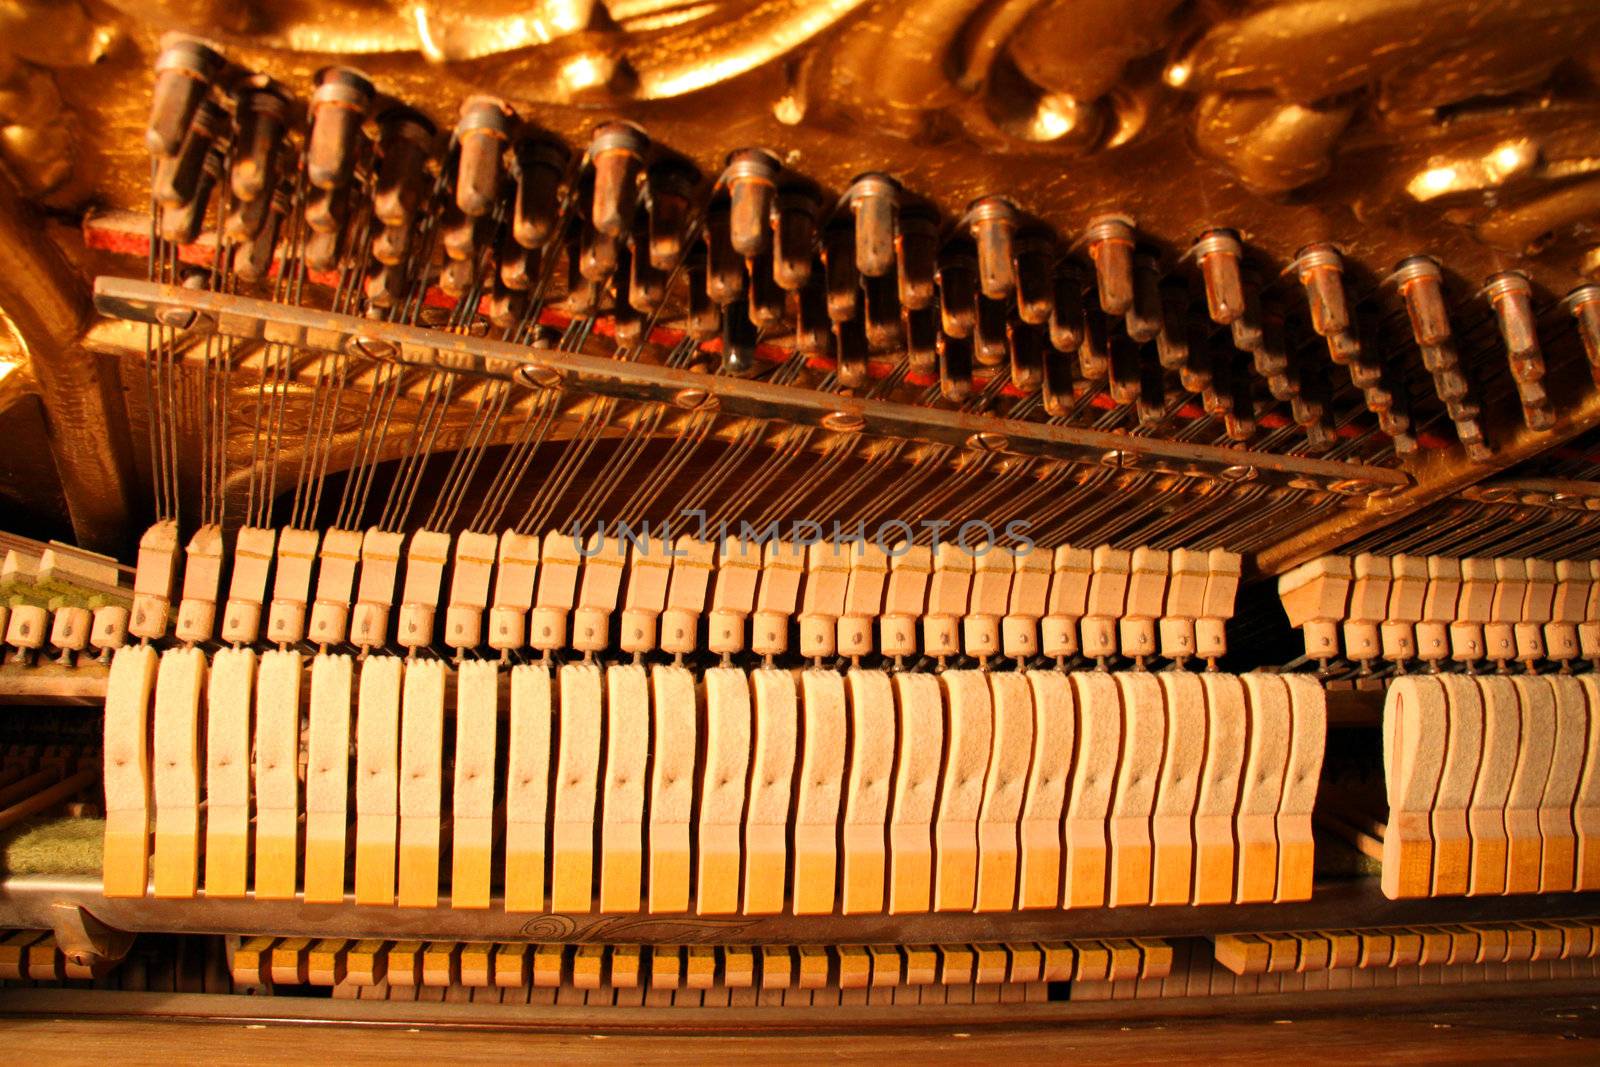 Inside an Upright Piano - Felt Hammers used to strike Steel Strings by Cloudia